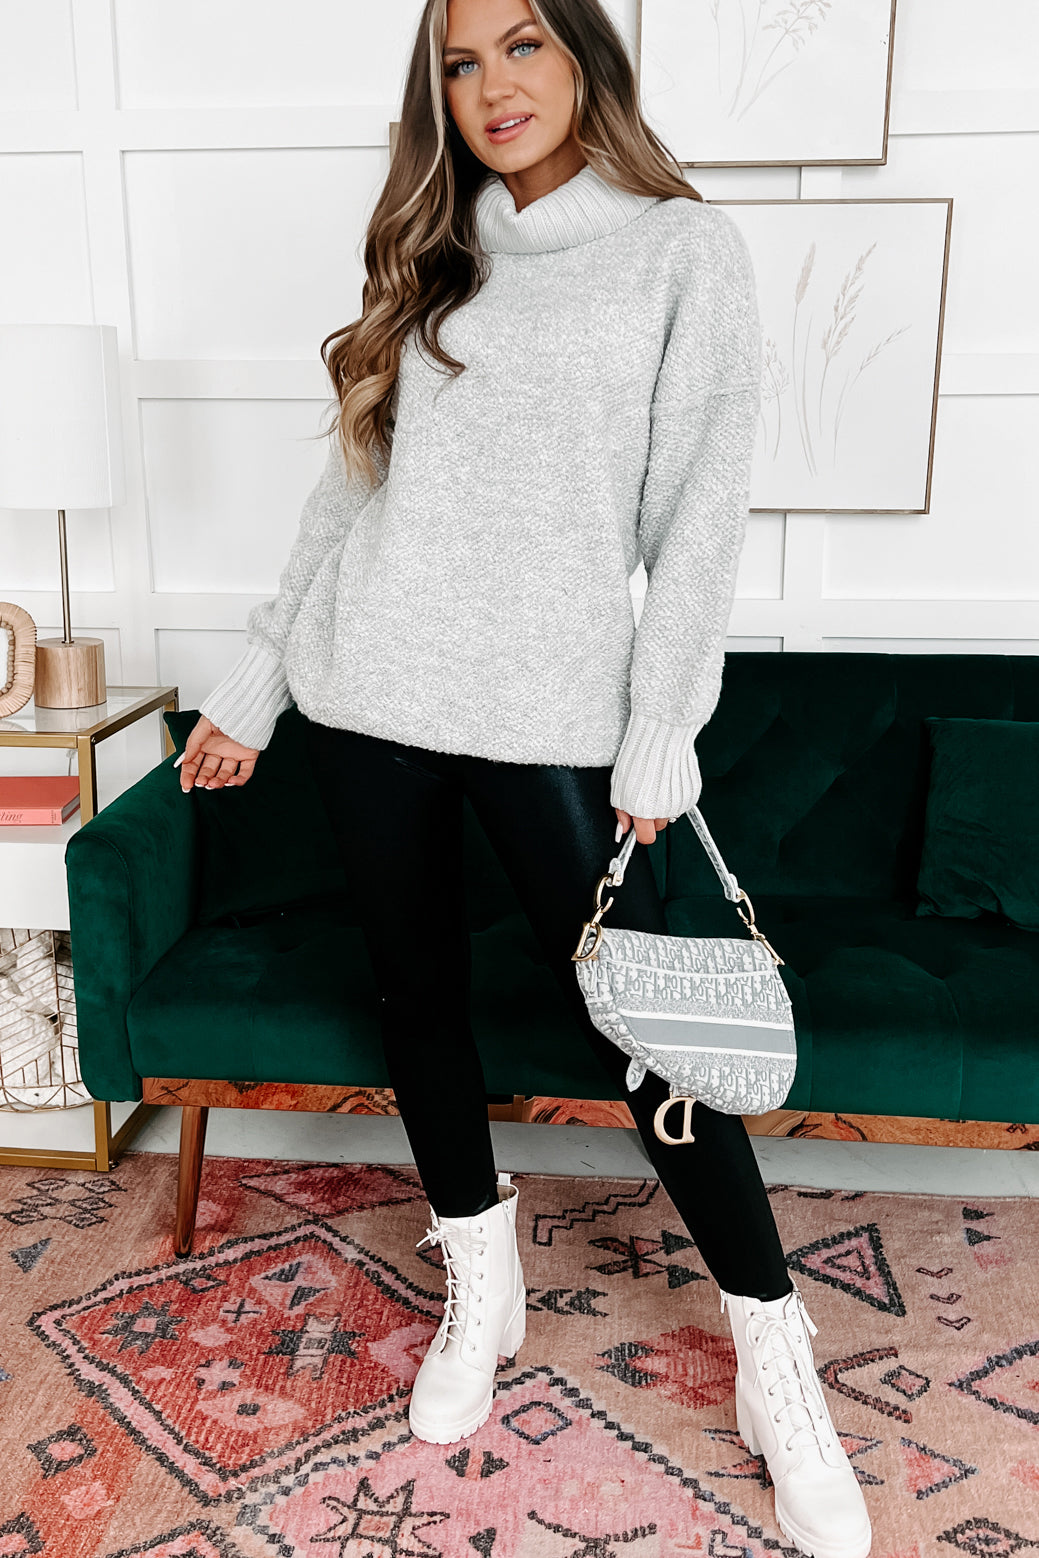 Grey Knit Turtleneck with Tights Outfits (4 ideas & outfits)